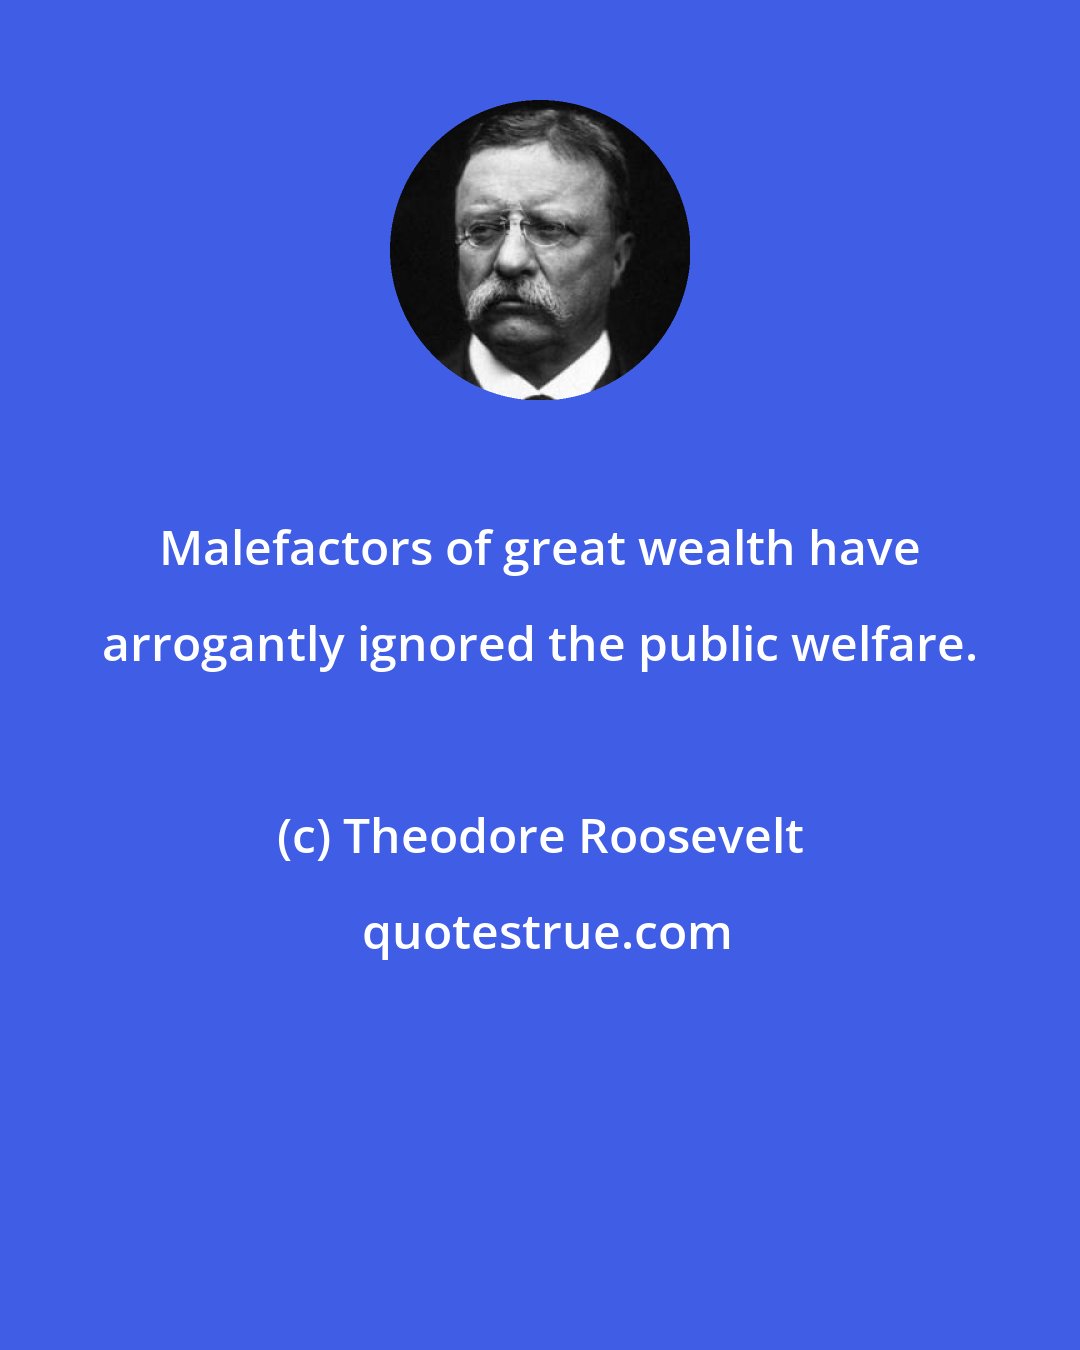 Theodore Roosevelt: Malefactors of great wealth have arrogantly ignored the public welfare.